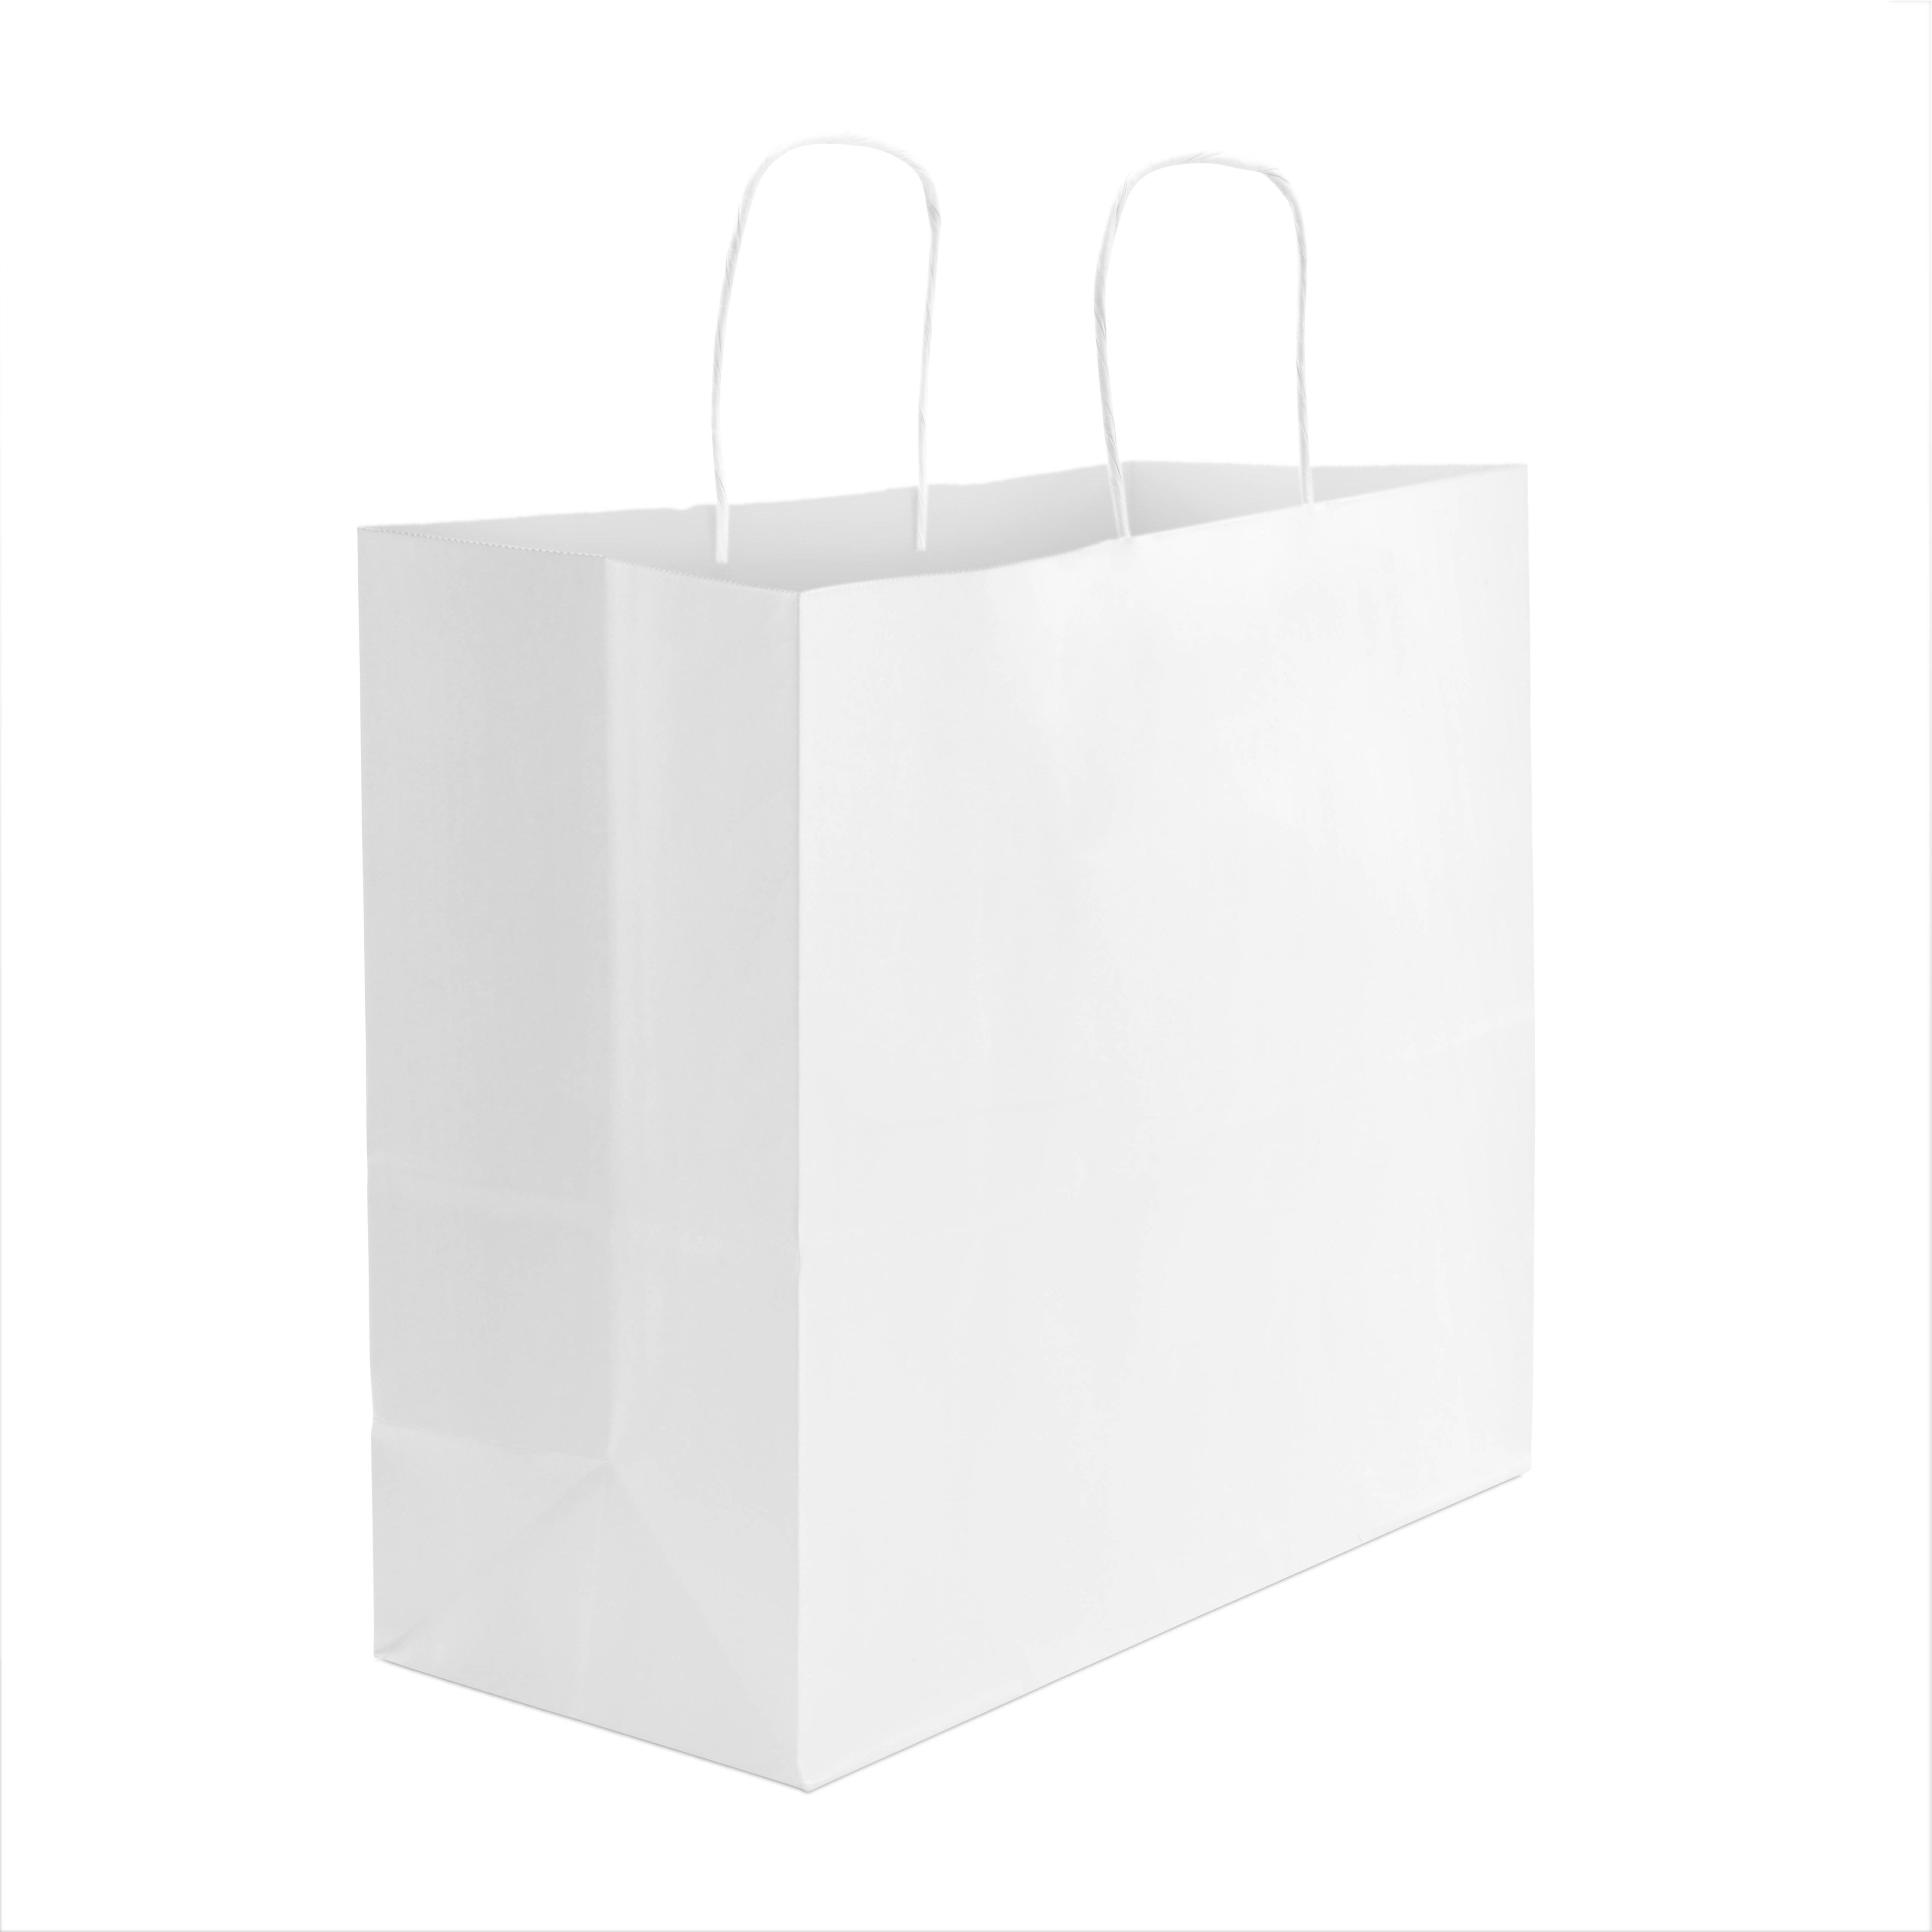 25ct Prime Line Packaging- Large Designer Gift Bags with Fabric Handles for All Occasion 25 Pack 16x6x12 Brown